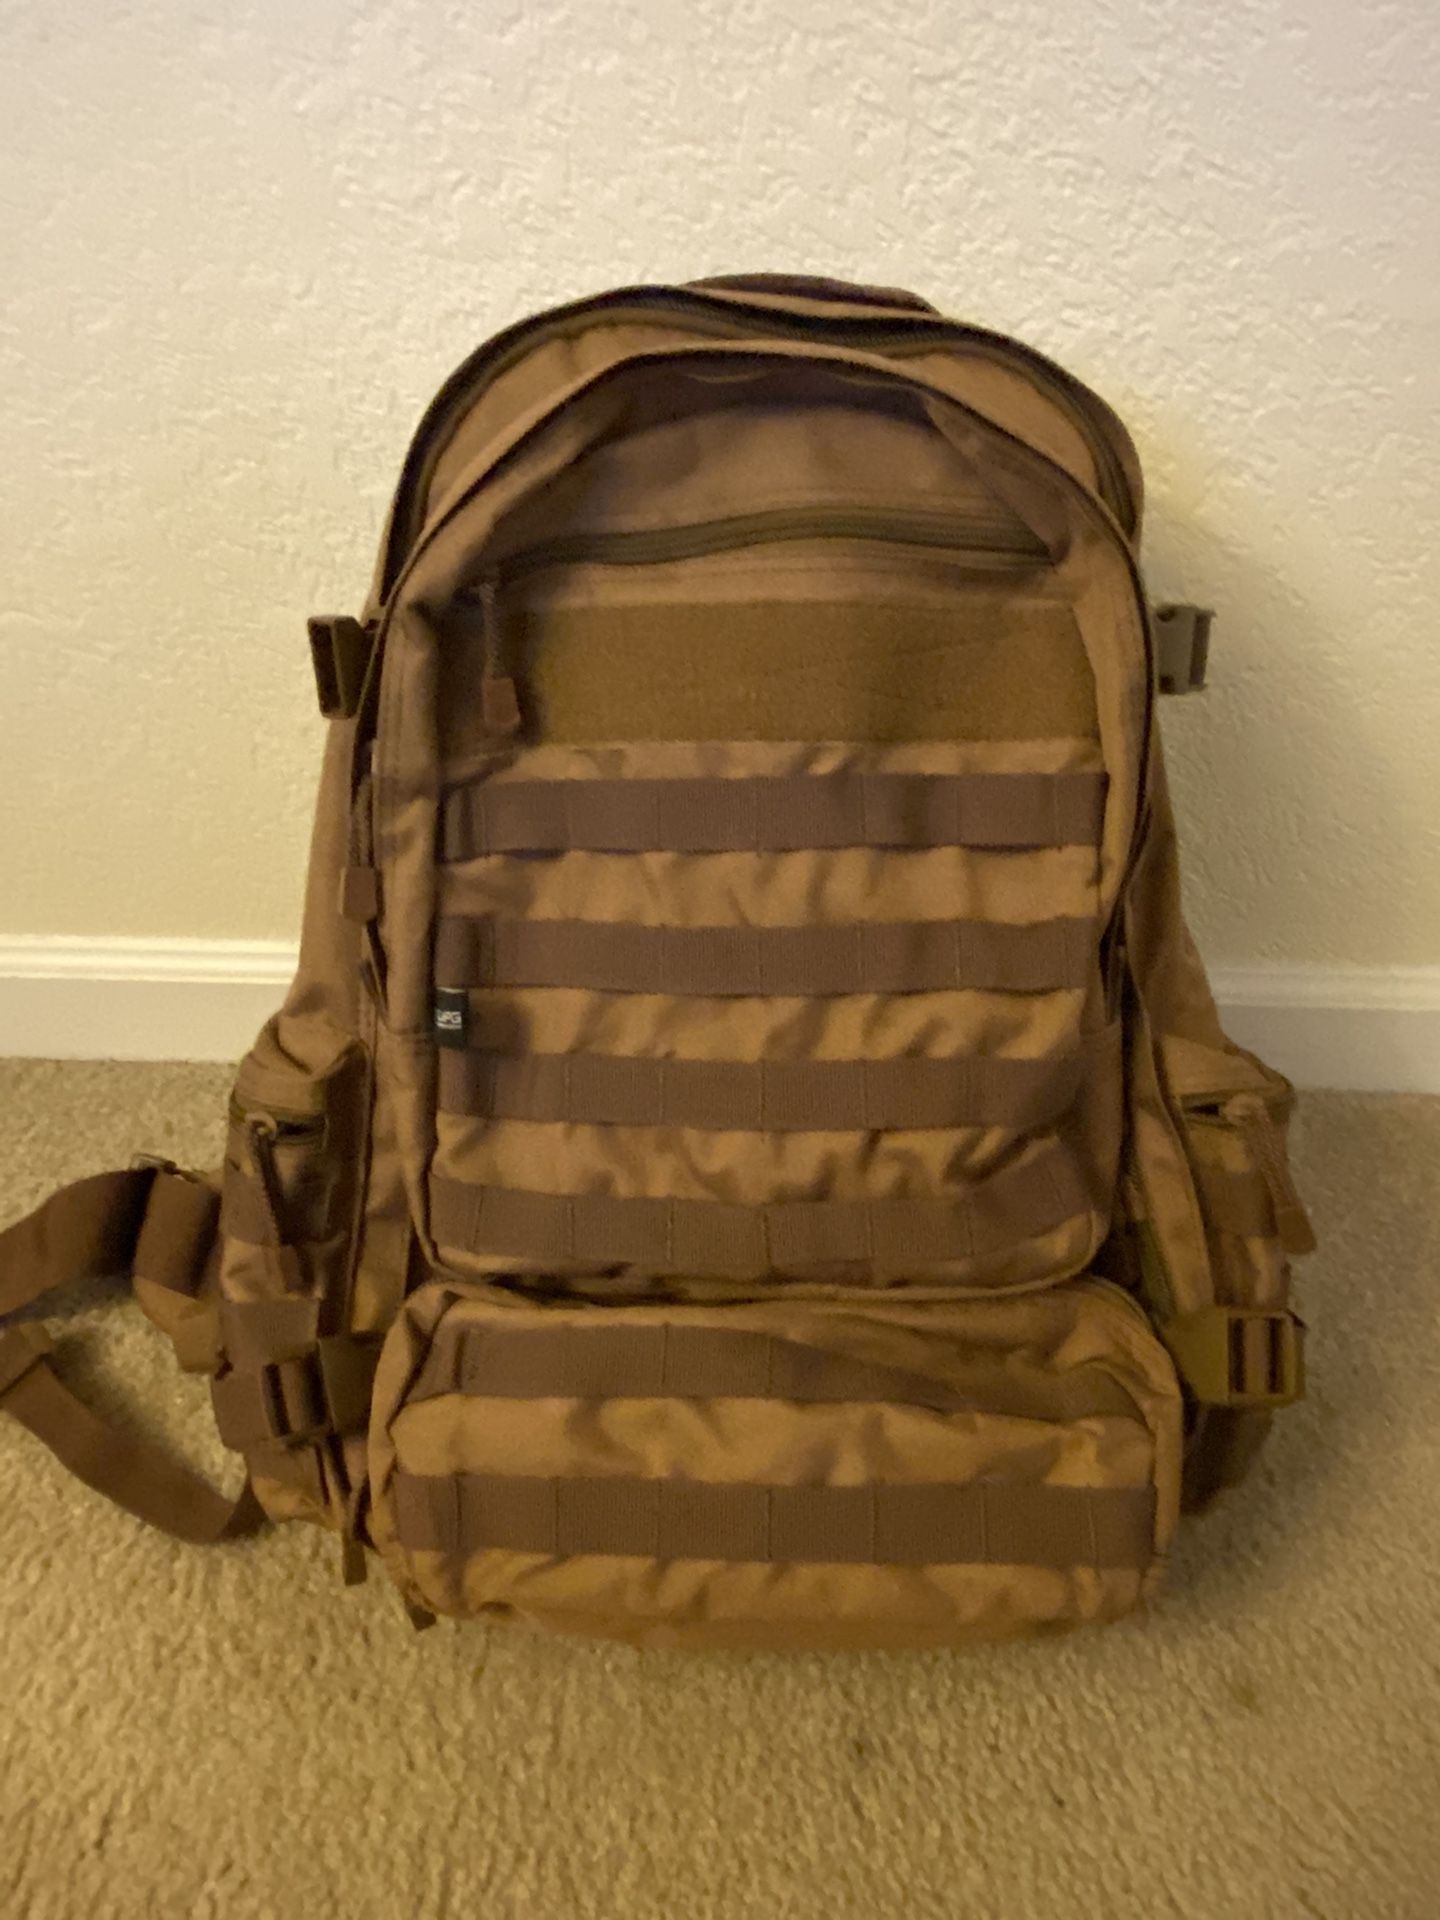 Barely Used! Tactical backpack from LA Police Gear